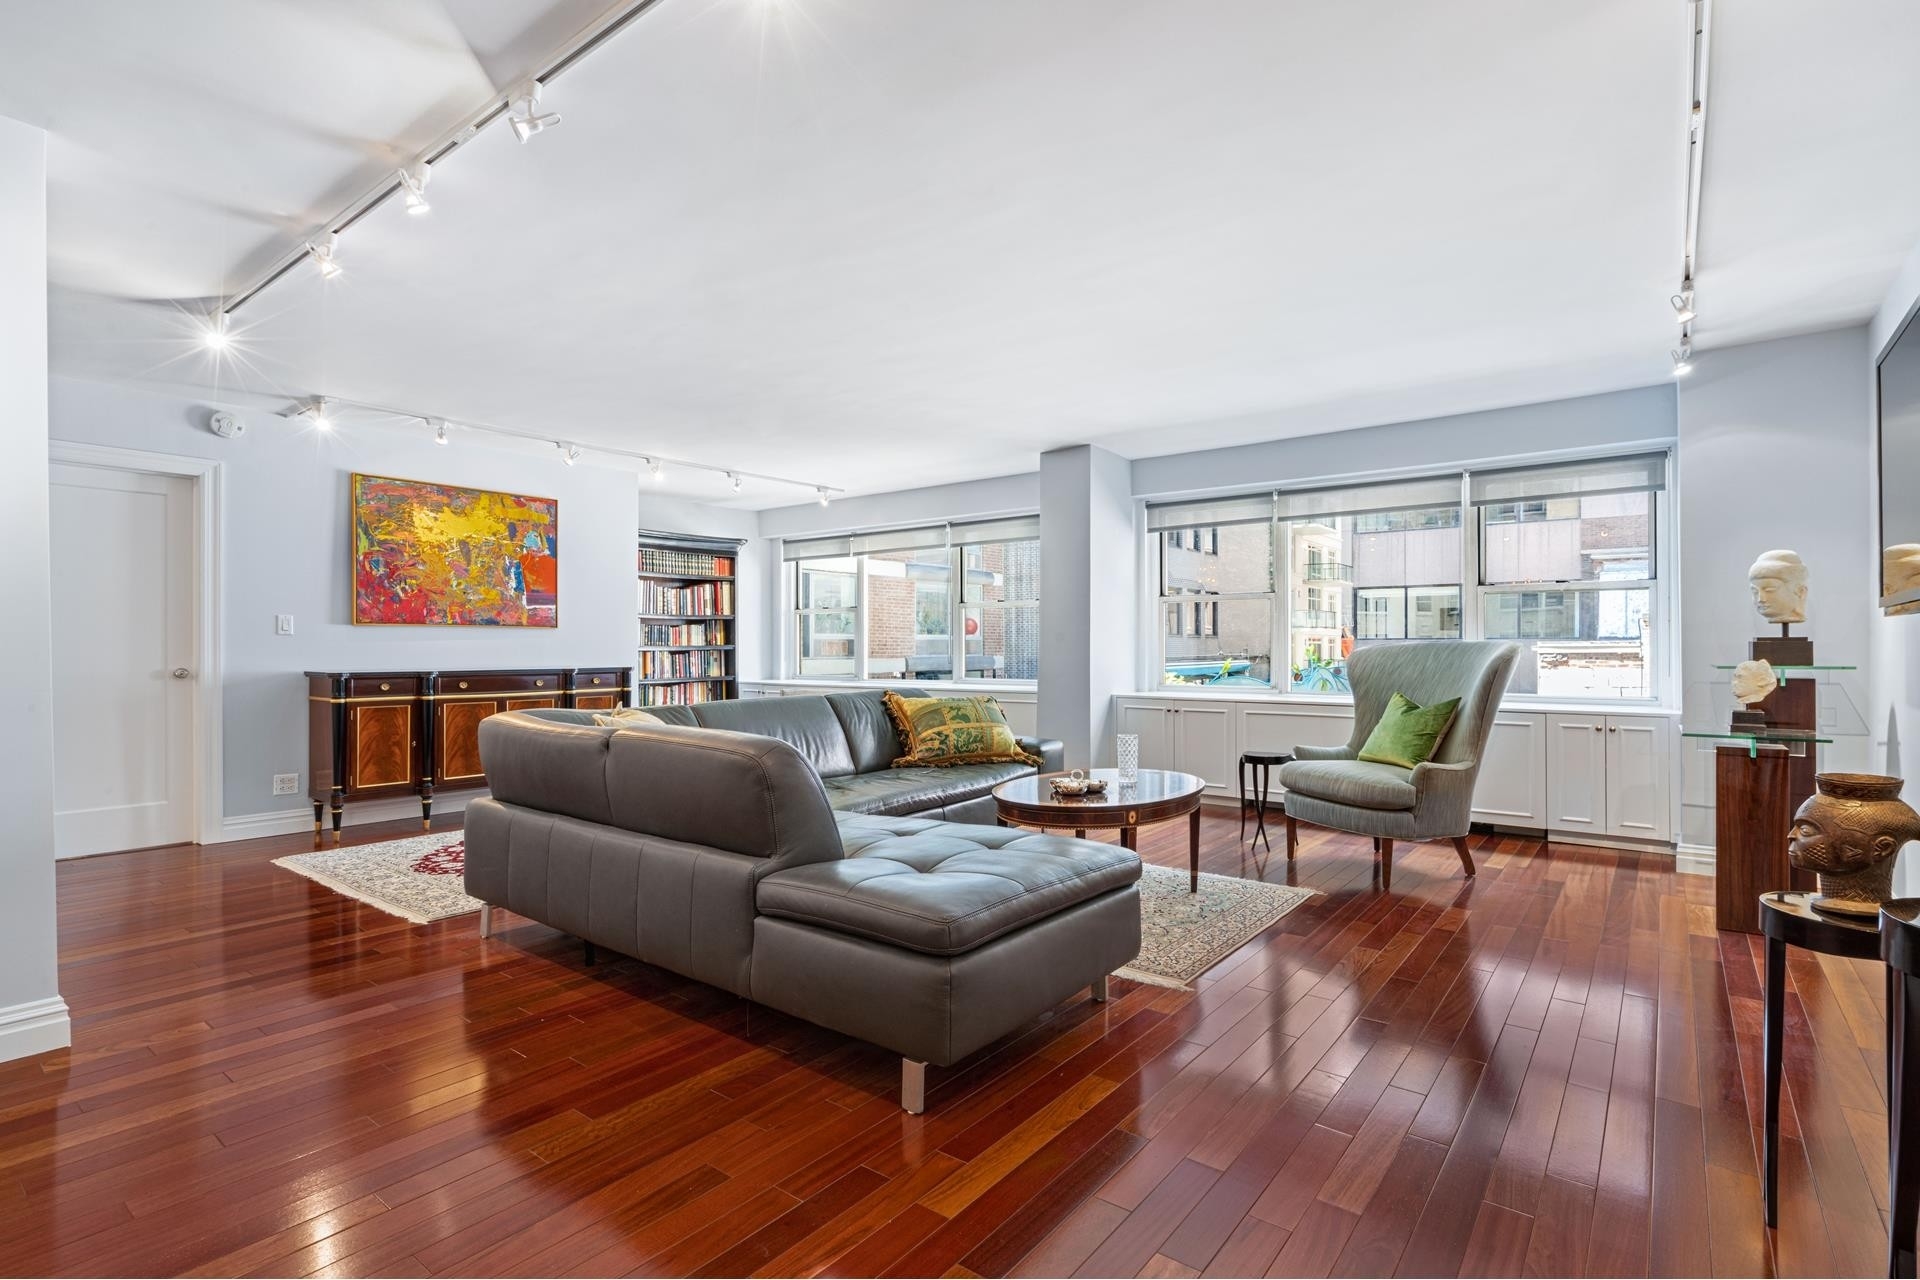 Property at 136 E 56TH ST, 4MN Midtown East, New York, NY 10022